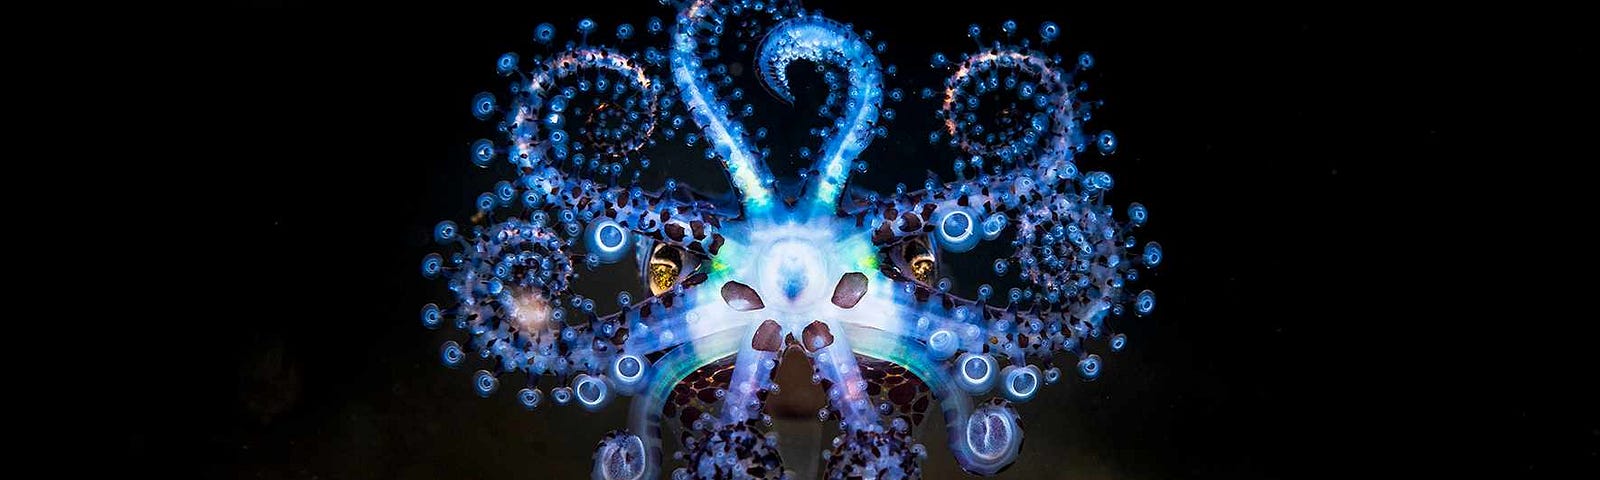 This hypnotising bioluminescent male squid, also known as the Euprymna tasmanica, was captured off the coast of Australia.